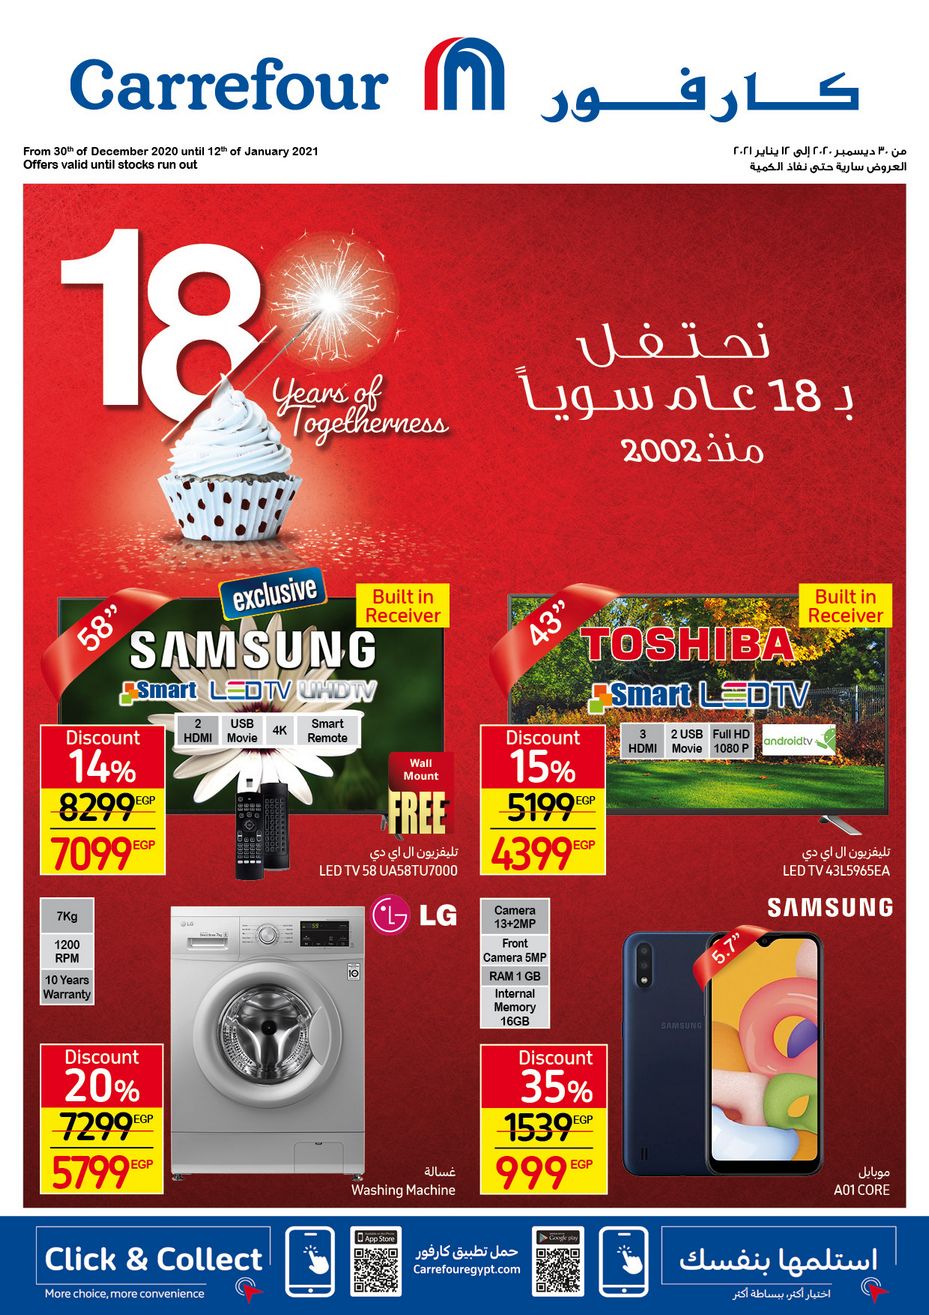 Carrefour Anniversary Offers till 18/2/2021 | Carrefour Egypt 2